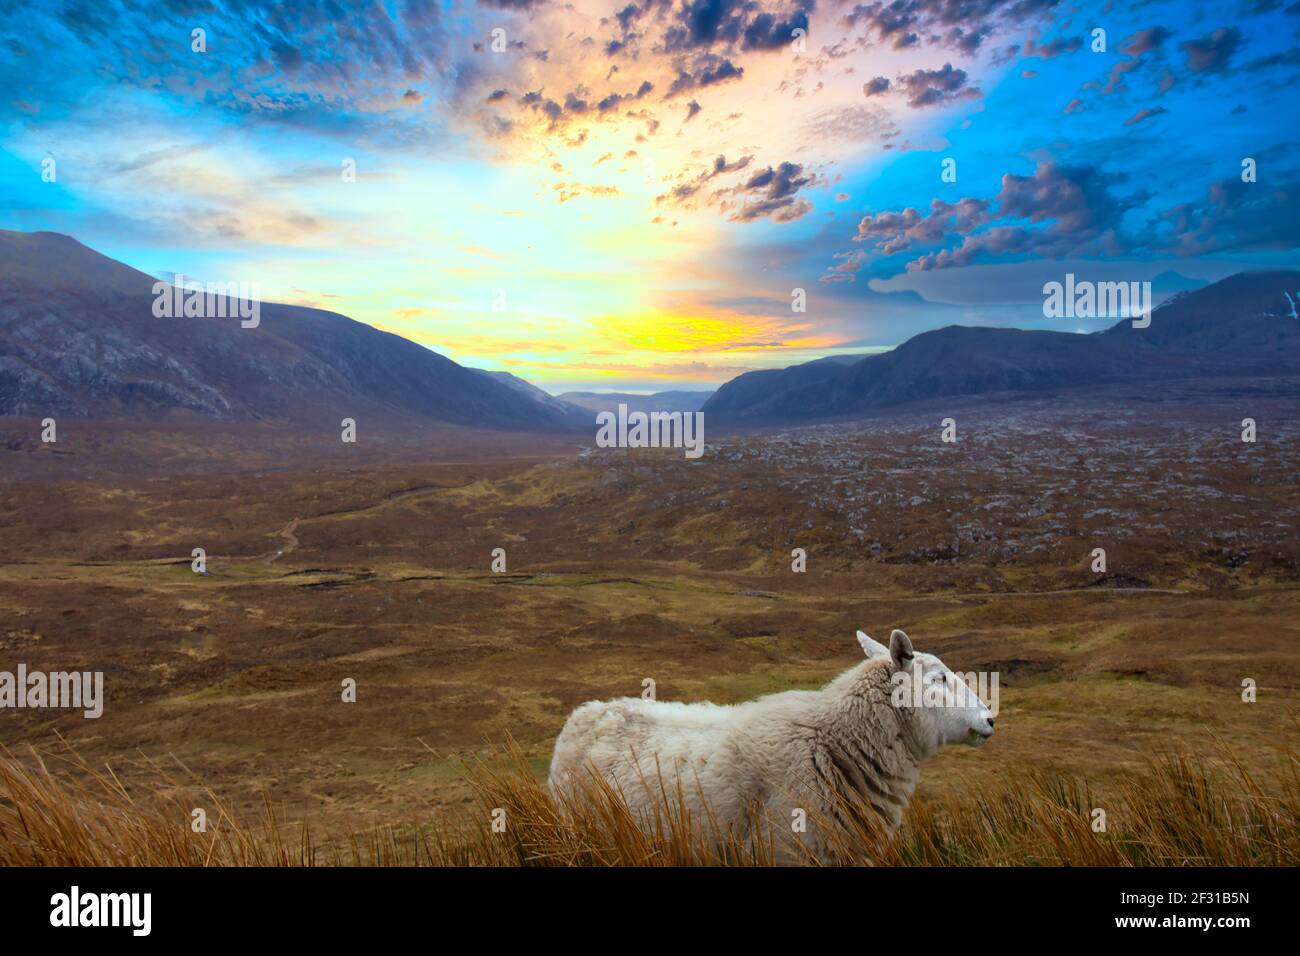 a lone sheep in front of a scenic view in the highlands Stock Photo